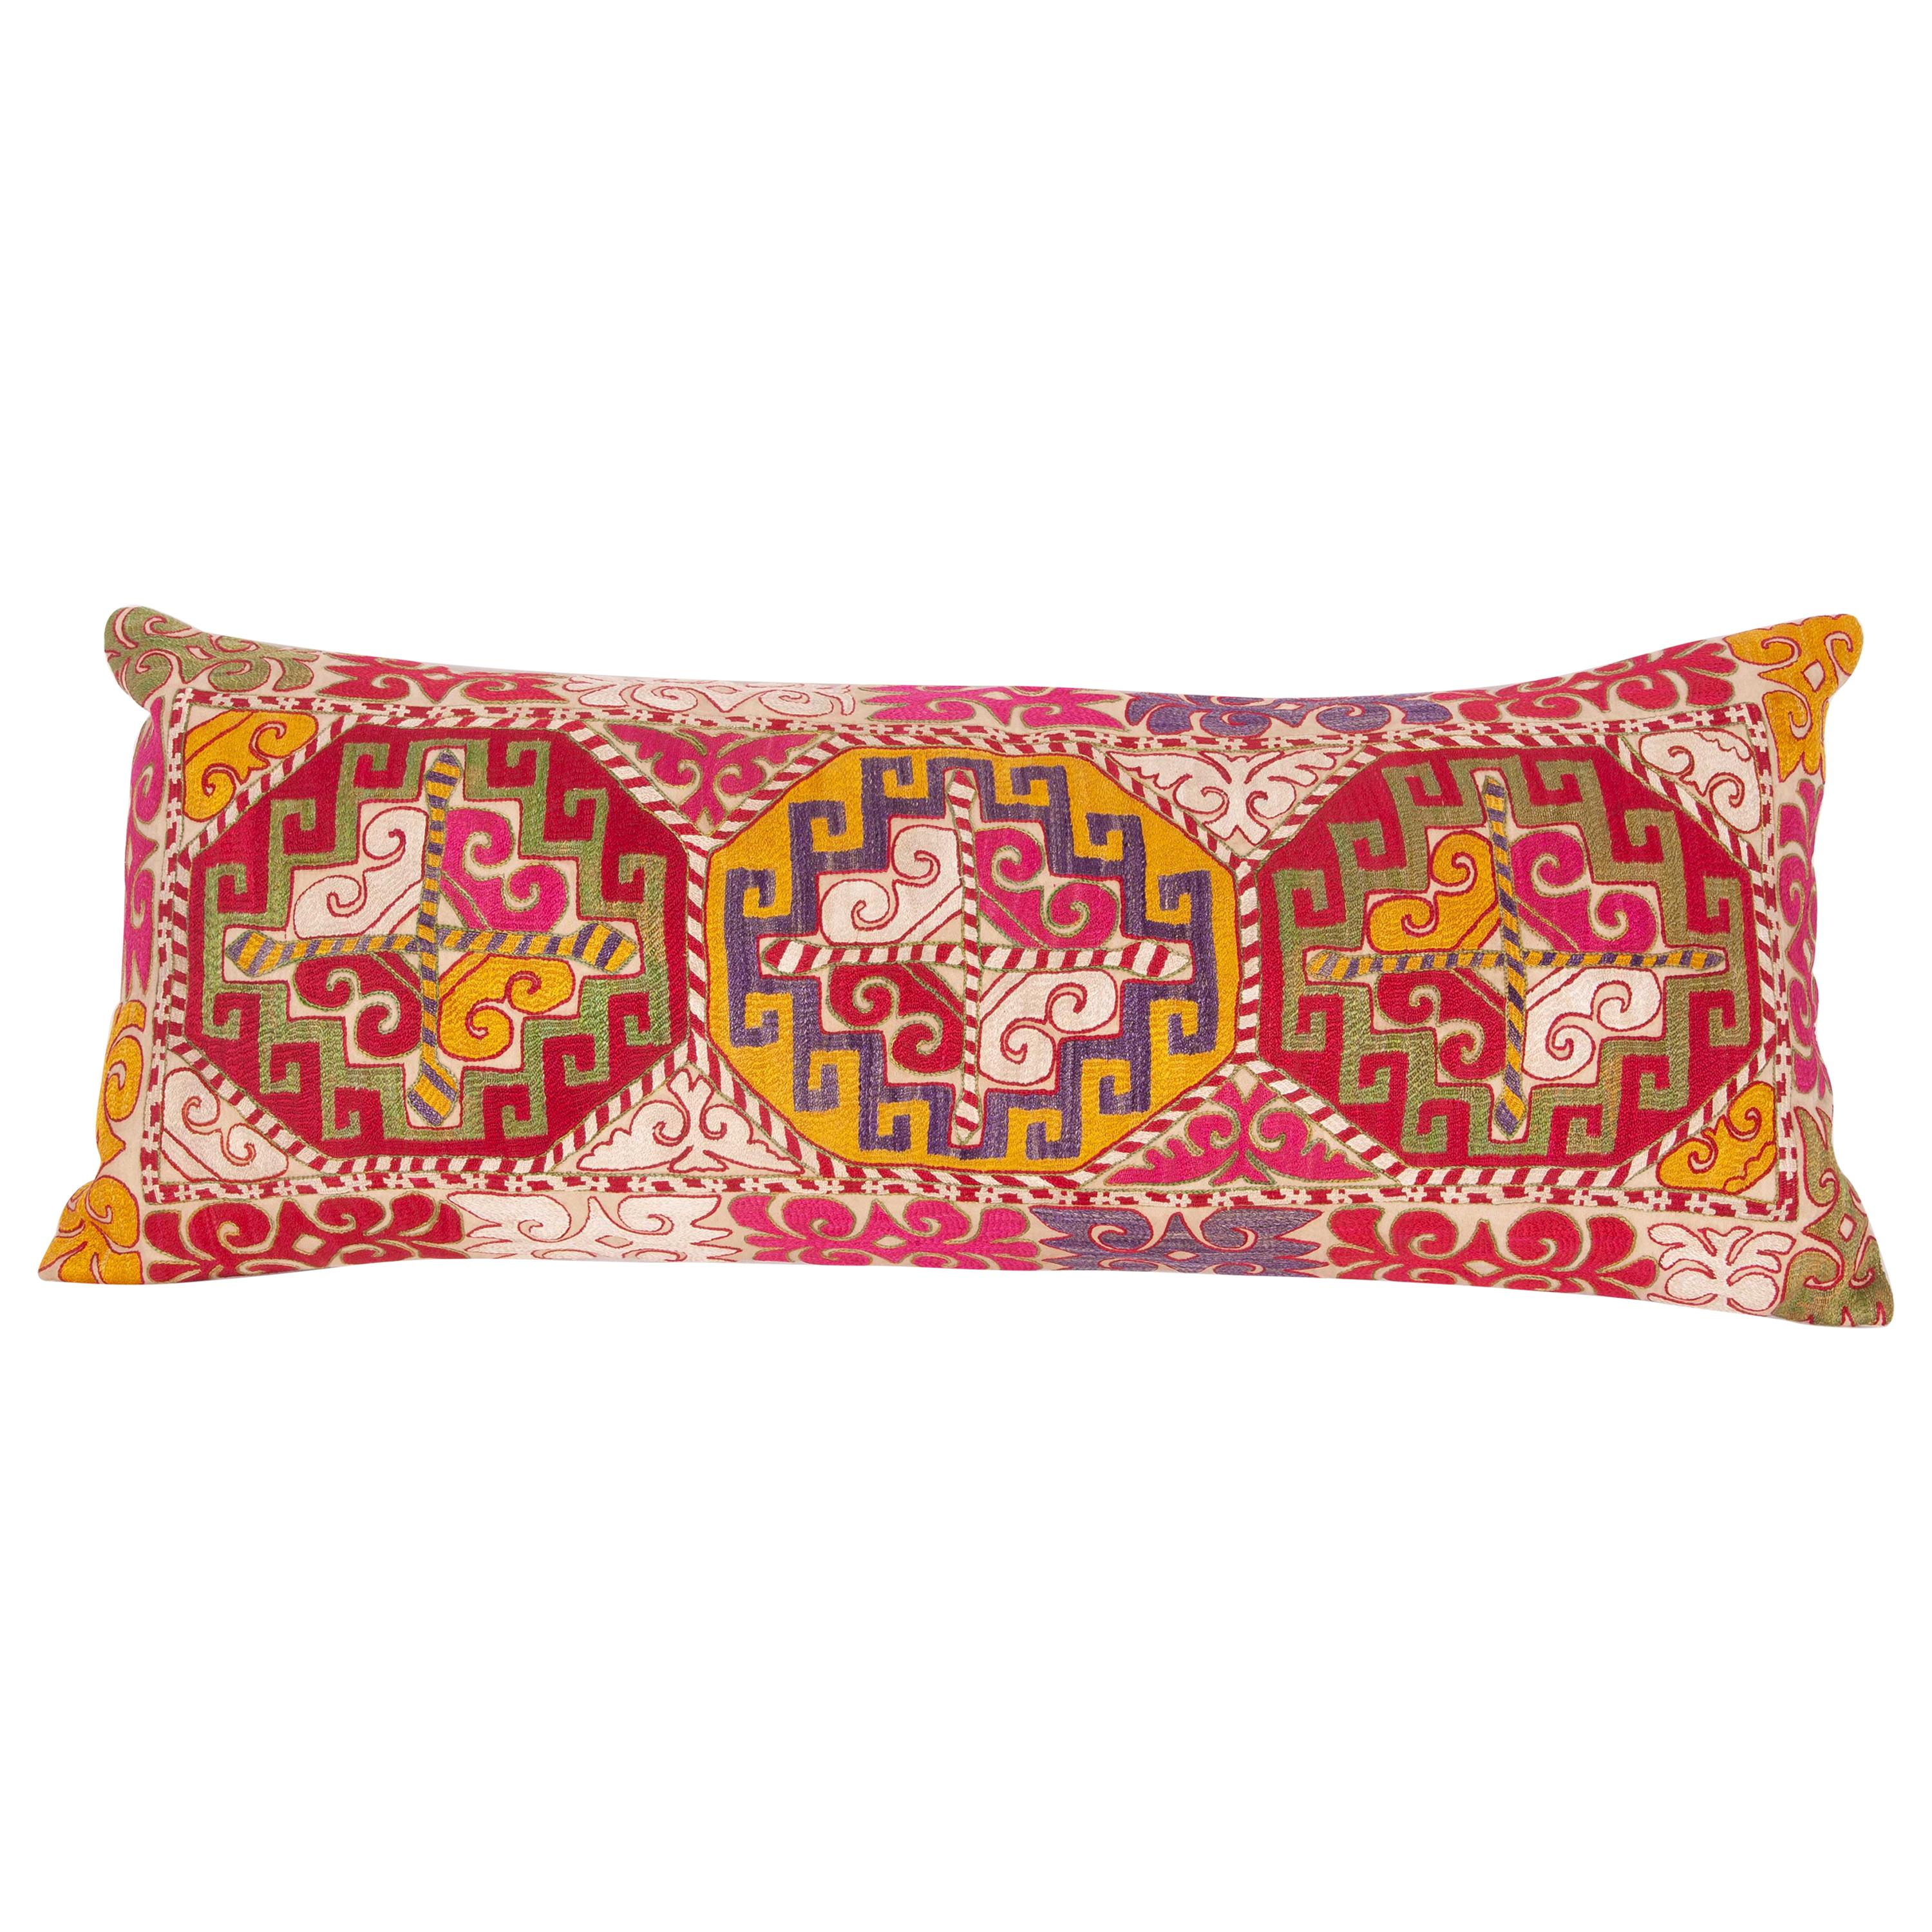 Lumbar Pillow Case Fashioned from an Uzbek Embroidered Mafrash Panel ...